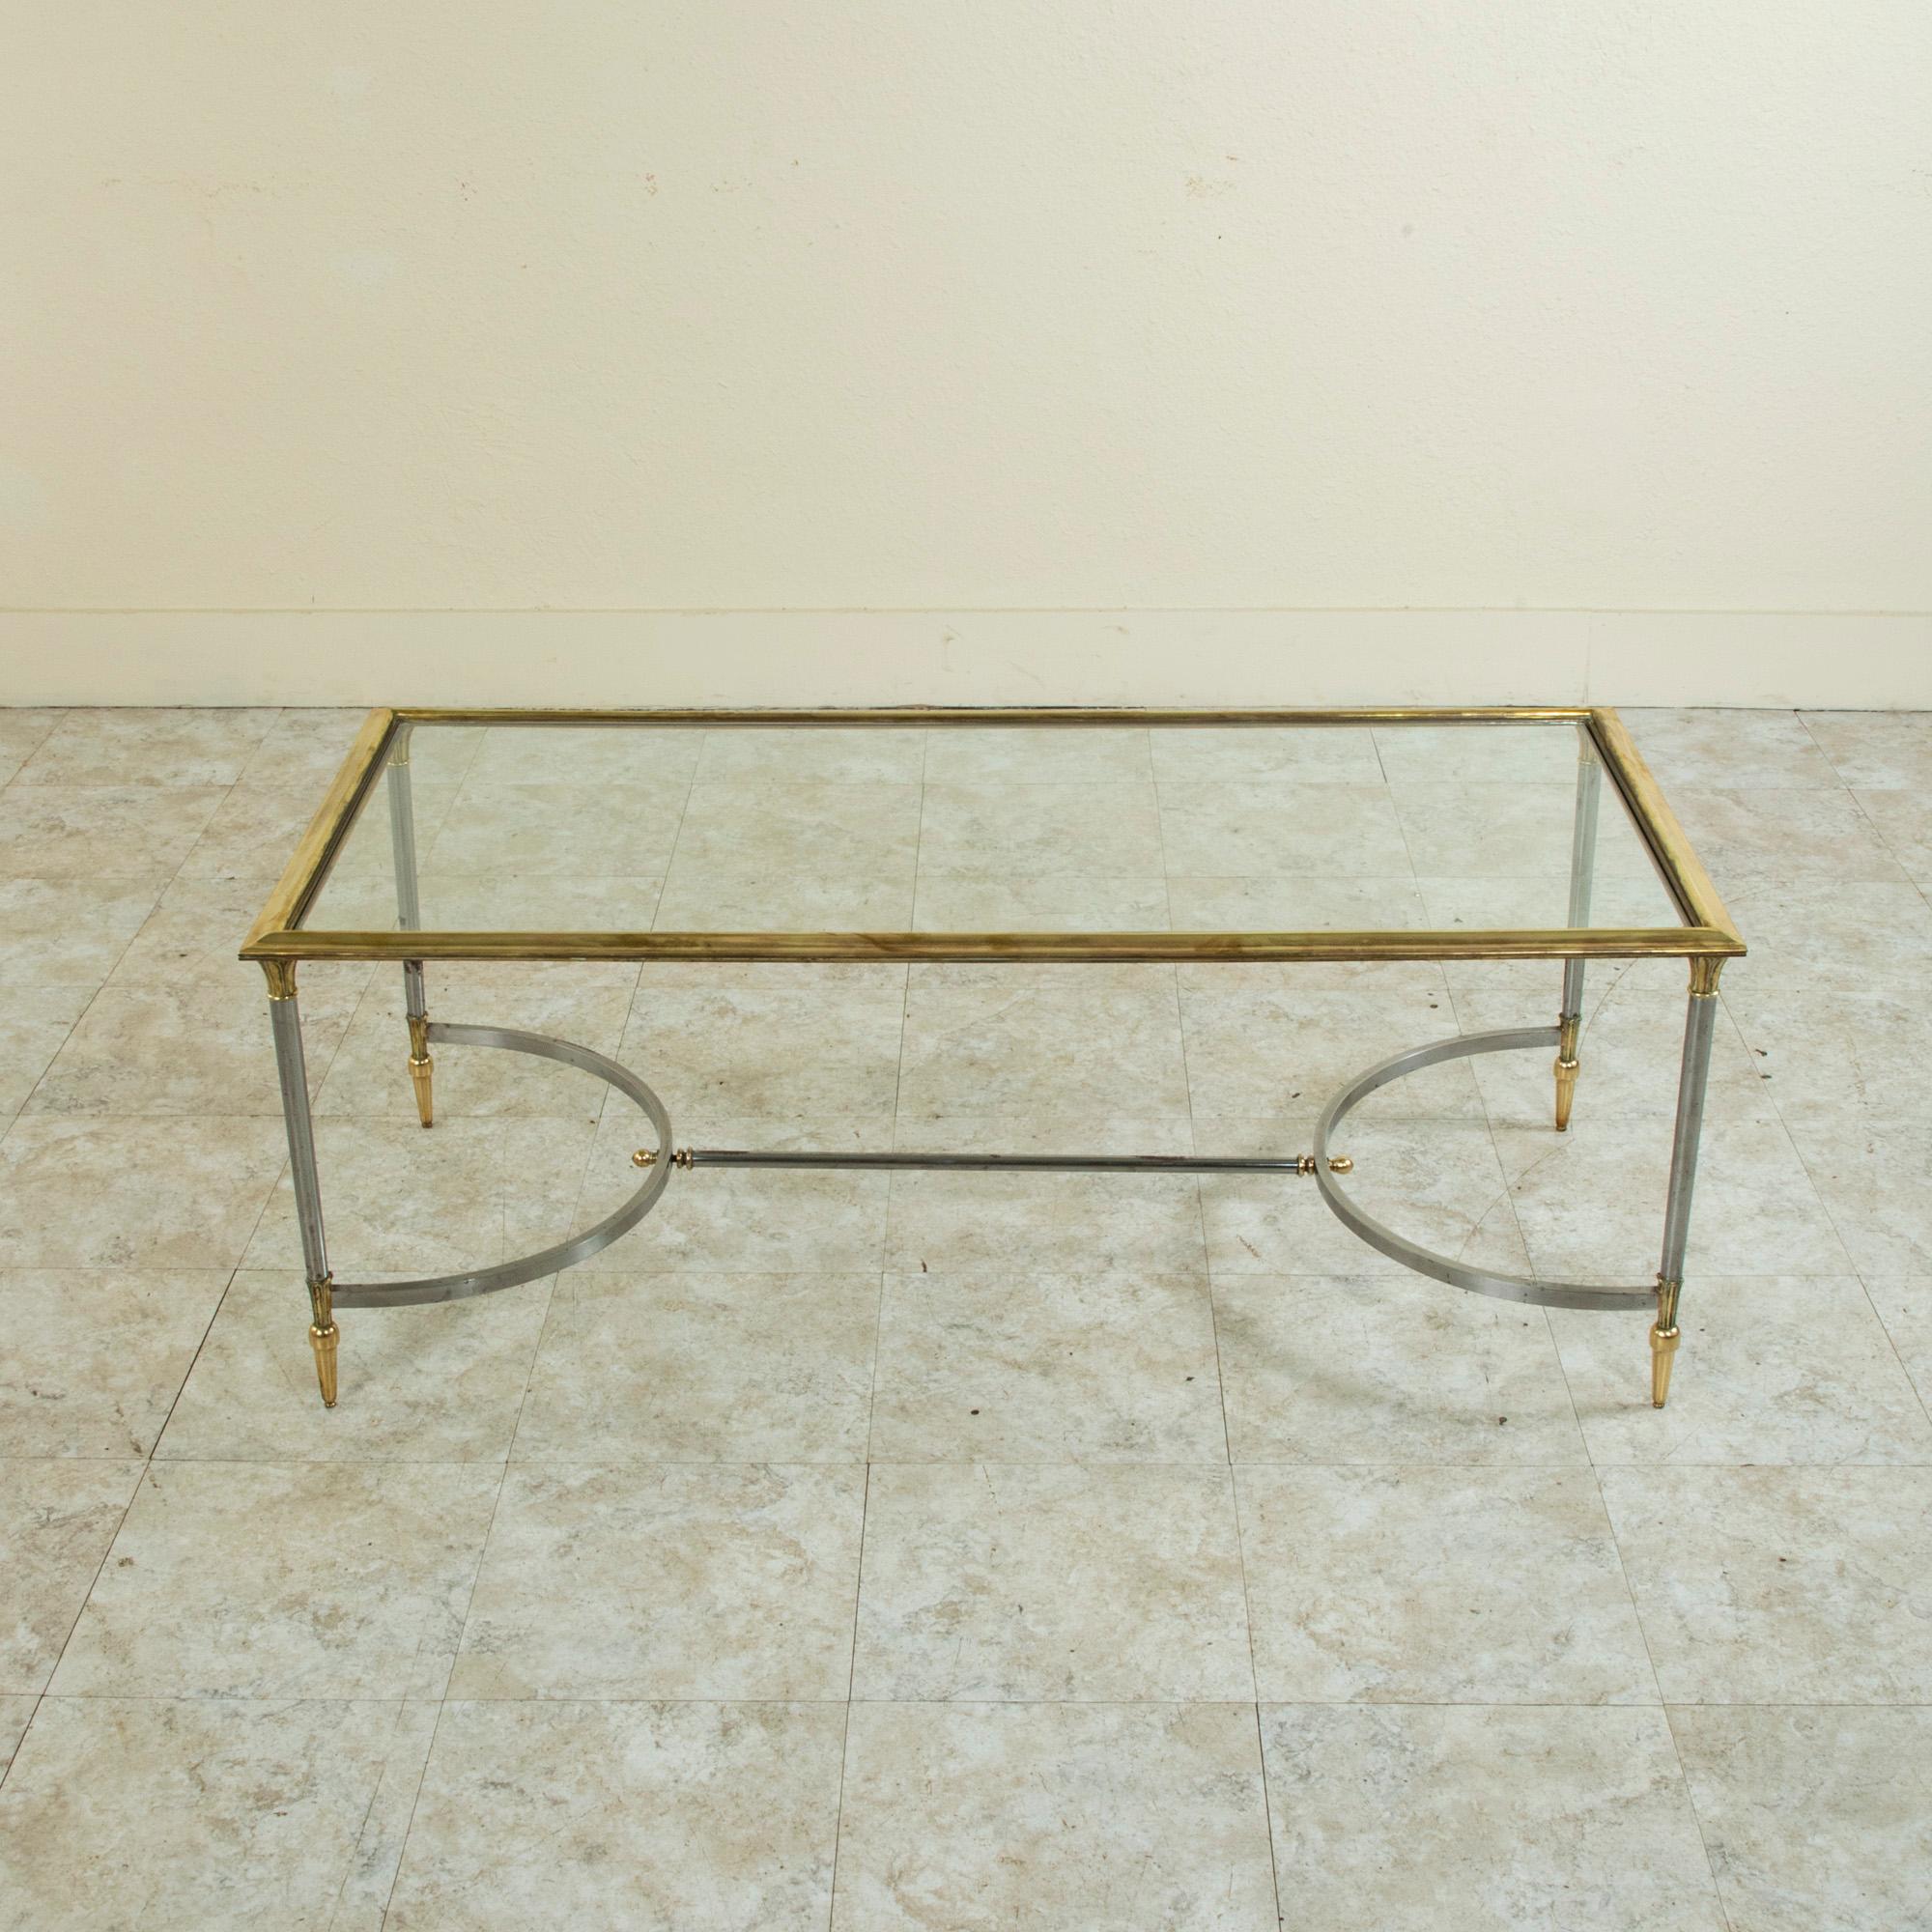 This mid-century French steel and brass coffee table or cocktail table is attributed to the Paris design house Maison Jansen and is inspired by the Directoire style with its Egyptian style capitals at the top of each leg. The base is joined by an H